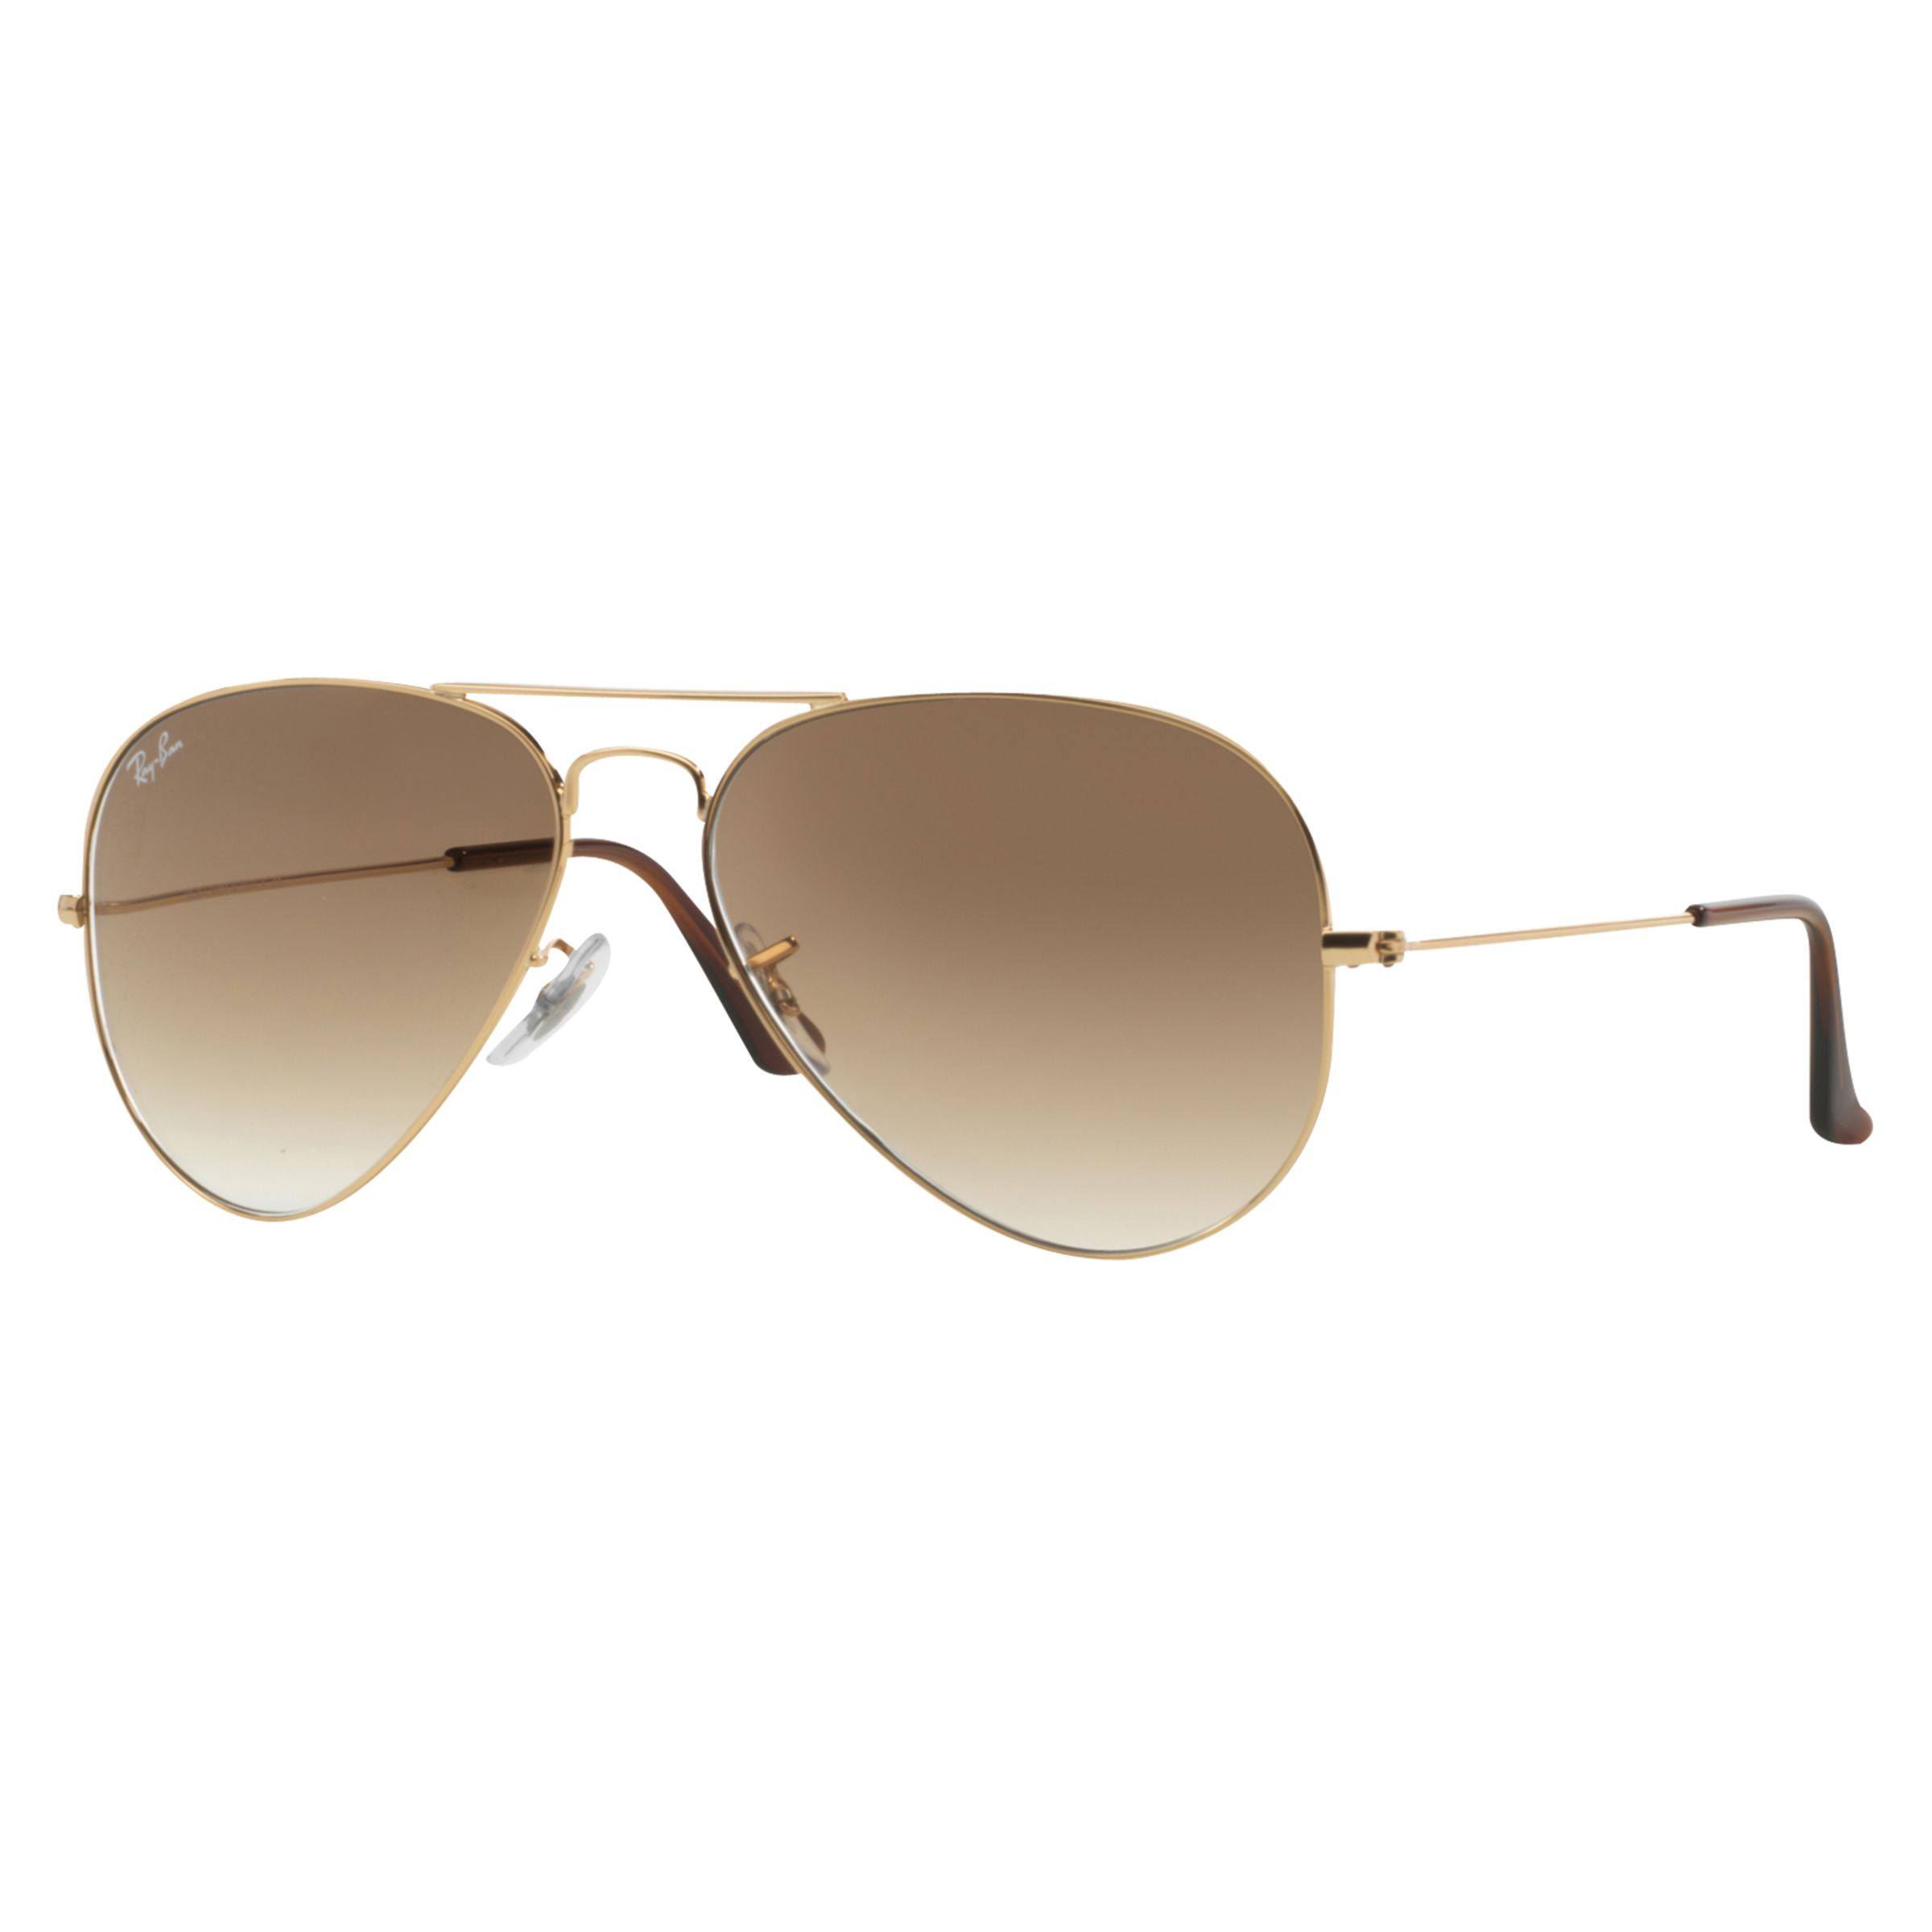 Ray-Ban RB3025 Aviator Sunglasses, Gold/Light Brown Gradient at John Lewis  & Partners